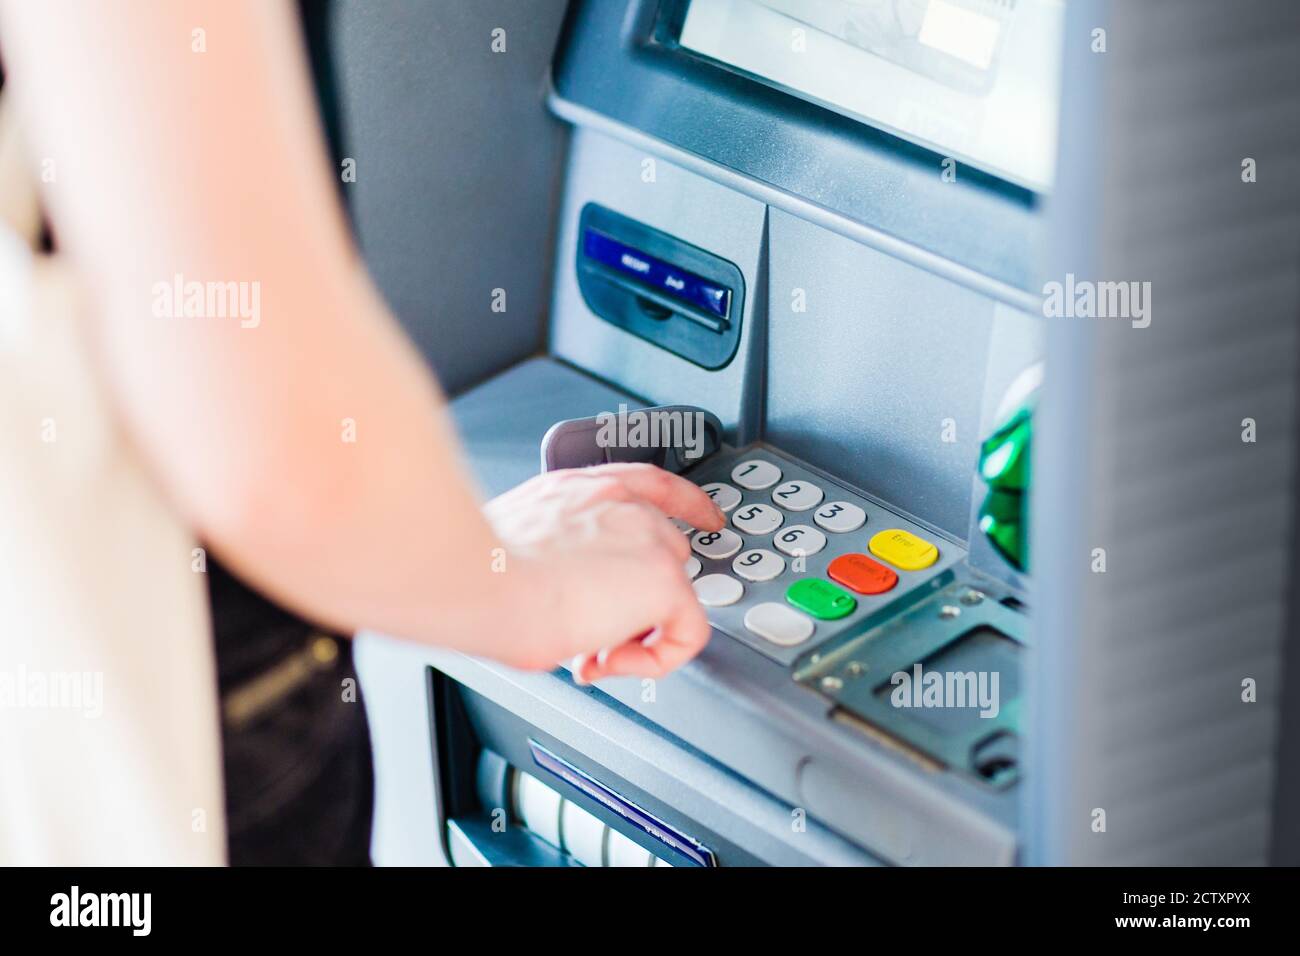 Close-up of person entering PIN code using an ATM bank machine to withdraw cash money. Stock Photo